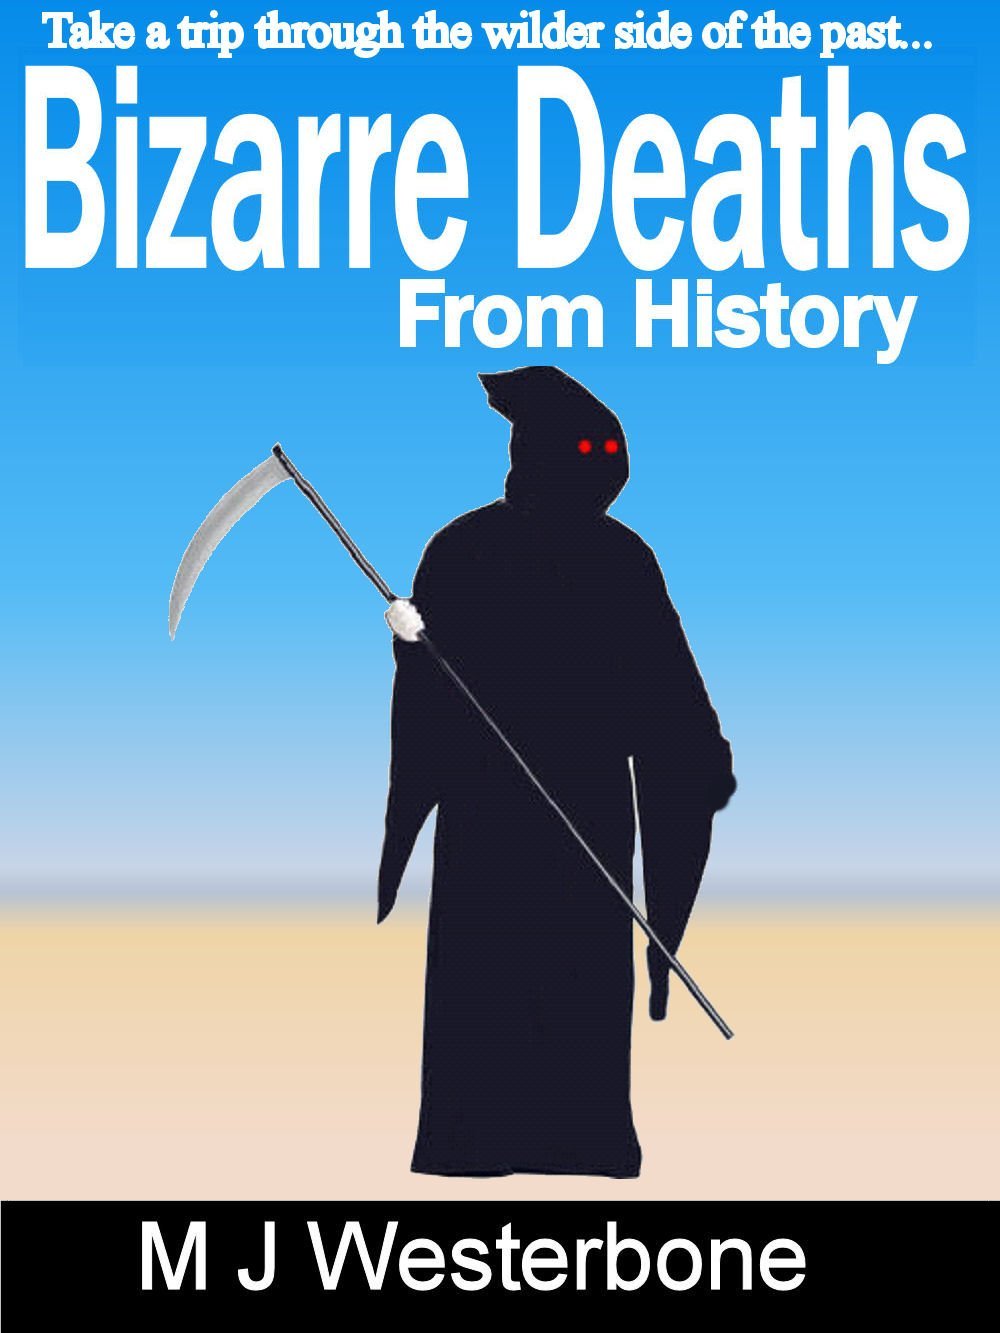 Bizarre Deaths From History by M.J. Westerbone